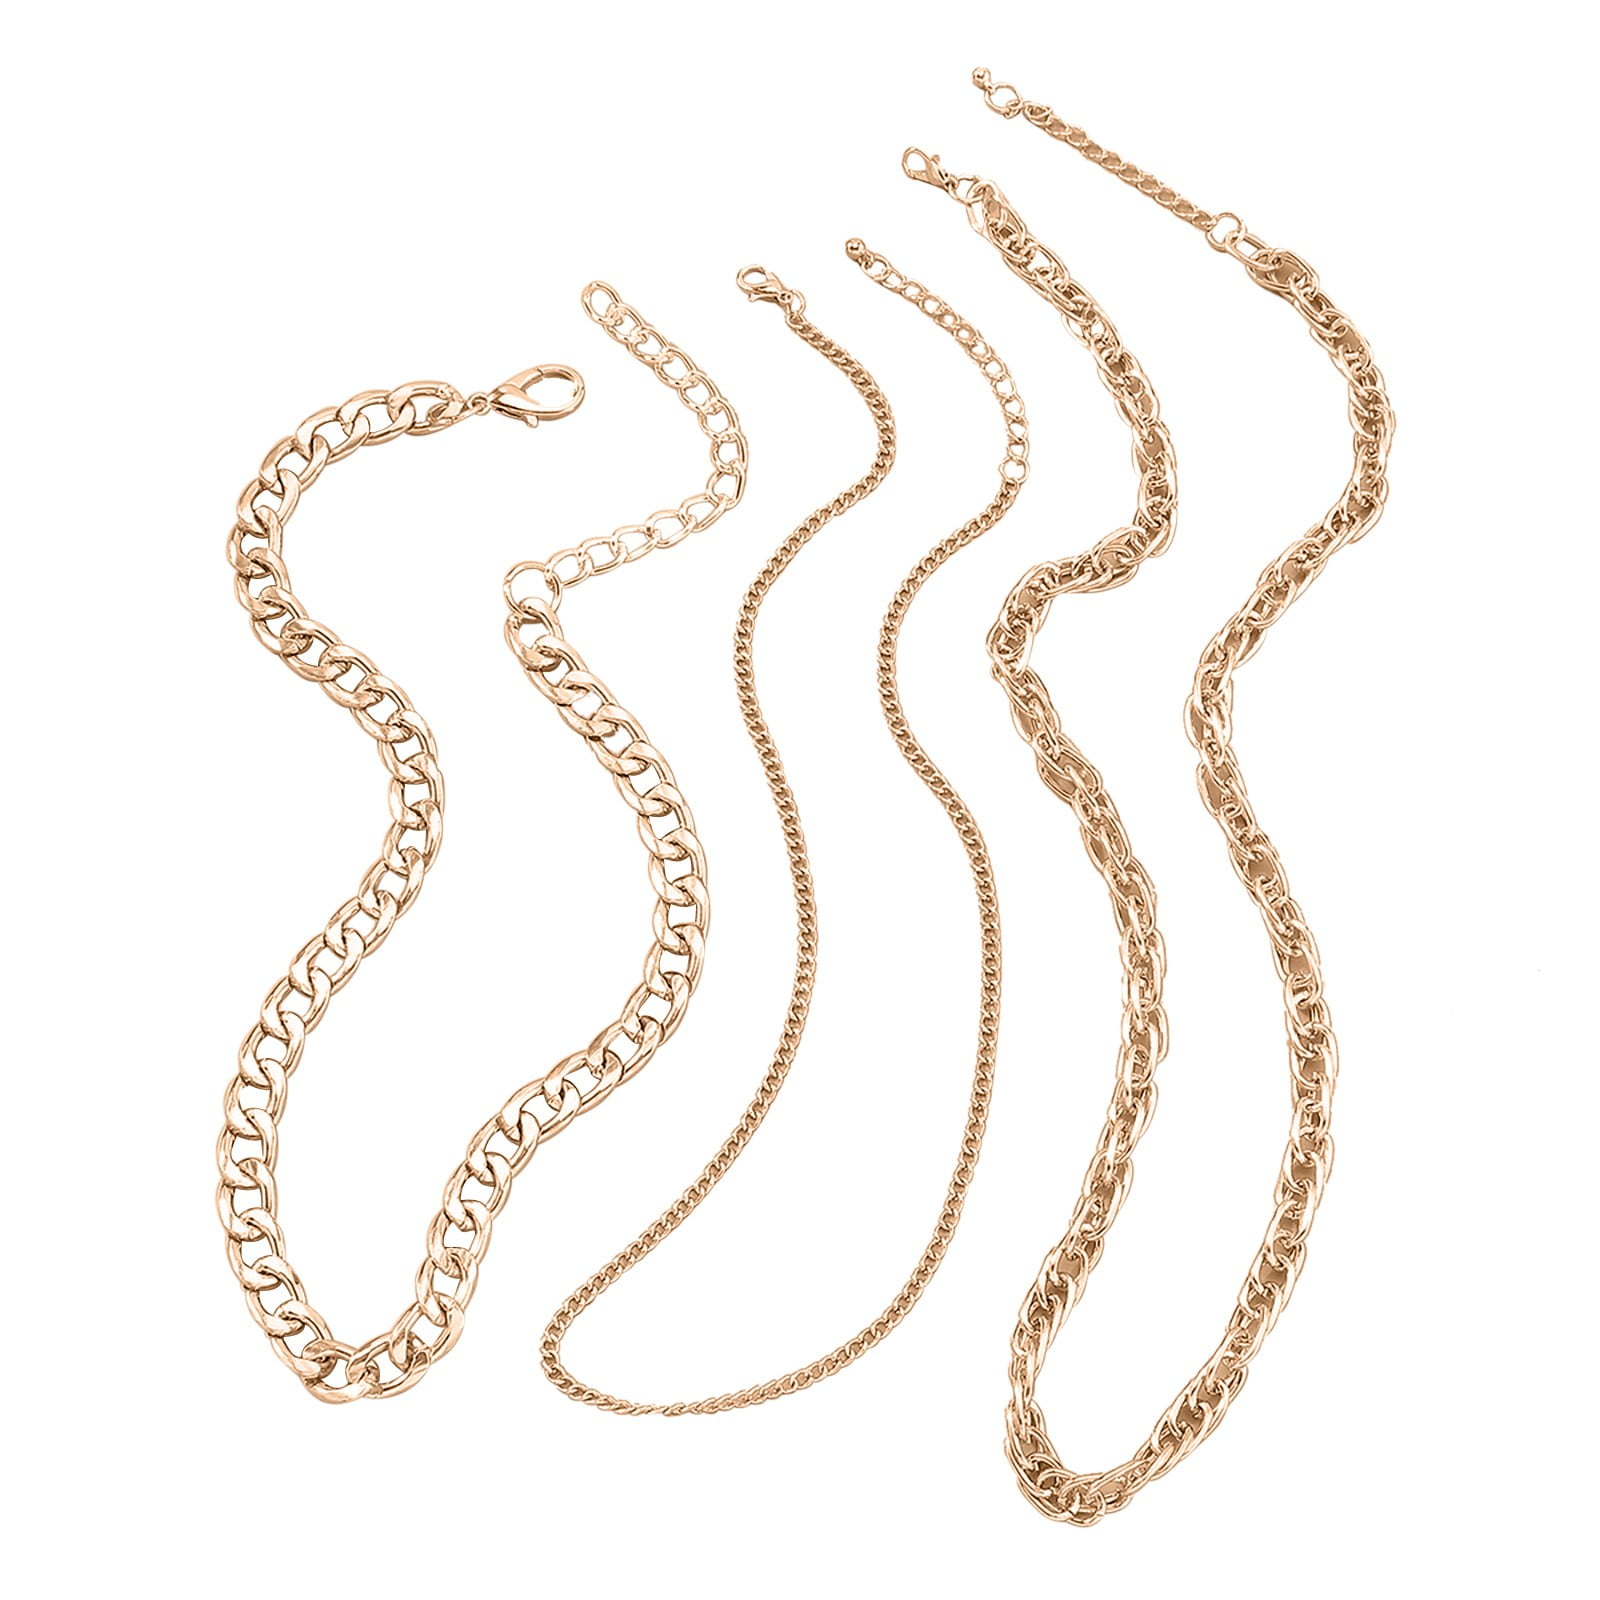 LALAFINA 300pcs Trendy Necklaces Fashion Jewelry Trendy Jewelry Fashion  Necklace DIY Supply Necklace Extensions Tail Chain for DIY Necklaces  Necklace